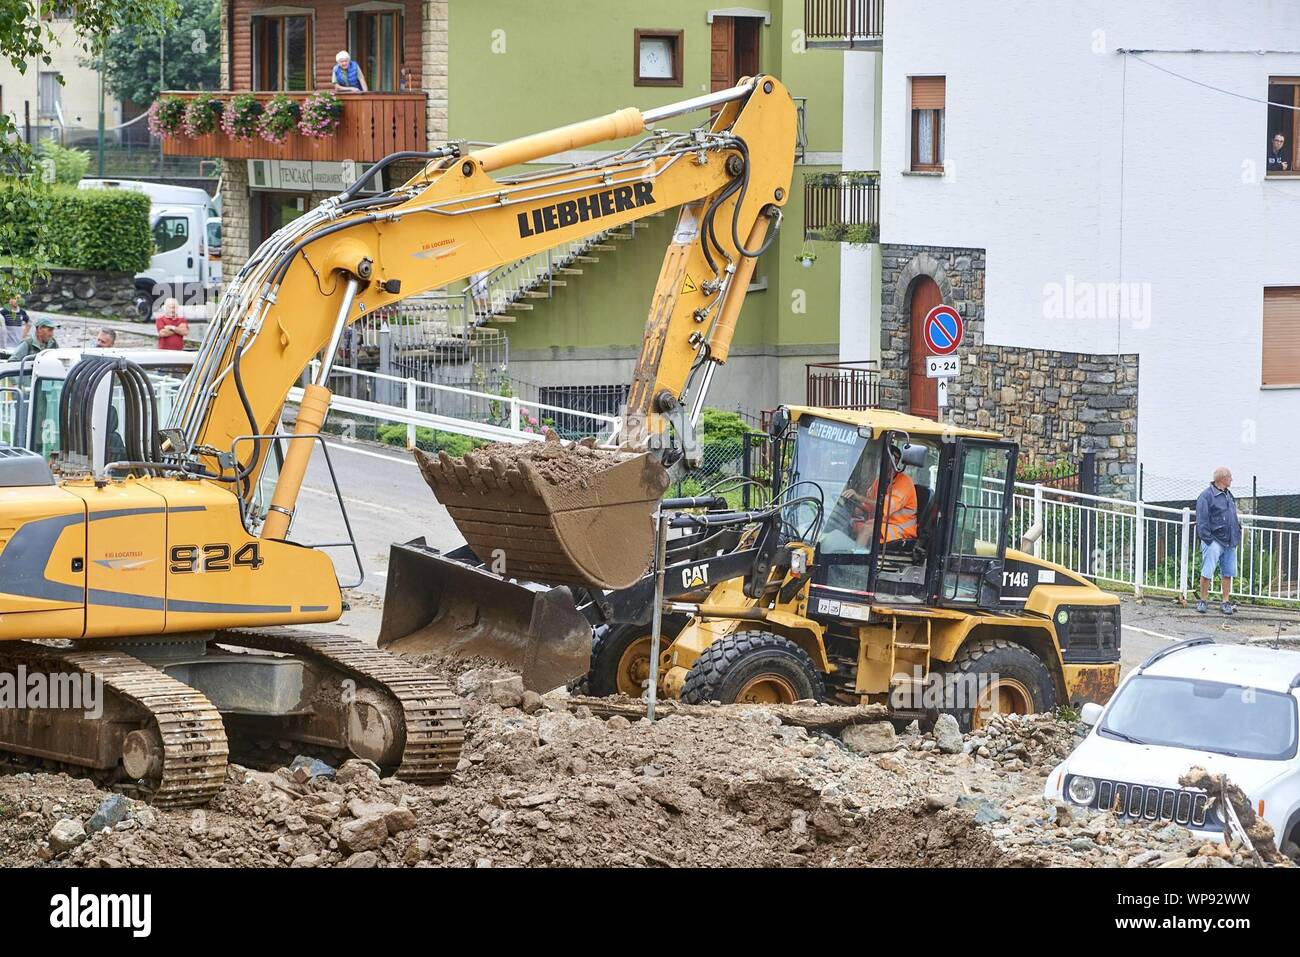 Over 200 people were evacuated from their homes in the mountain town of Casargo, Italy, after severe storms triggered landslides and flash flooding. Featuring: atmosphere Where: Casargo, Lombardy, Italy When: 07 Aug 2019 Credit: IPA/WENN.com  **Only available for publication in UK, USA, Germany, Austria, Switzerland** Stock Photo